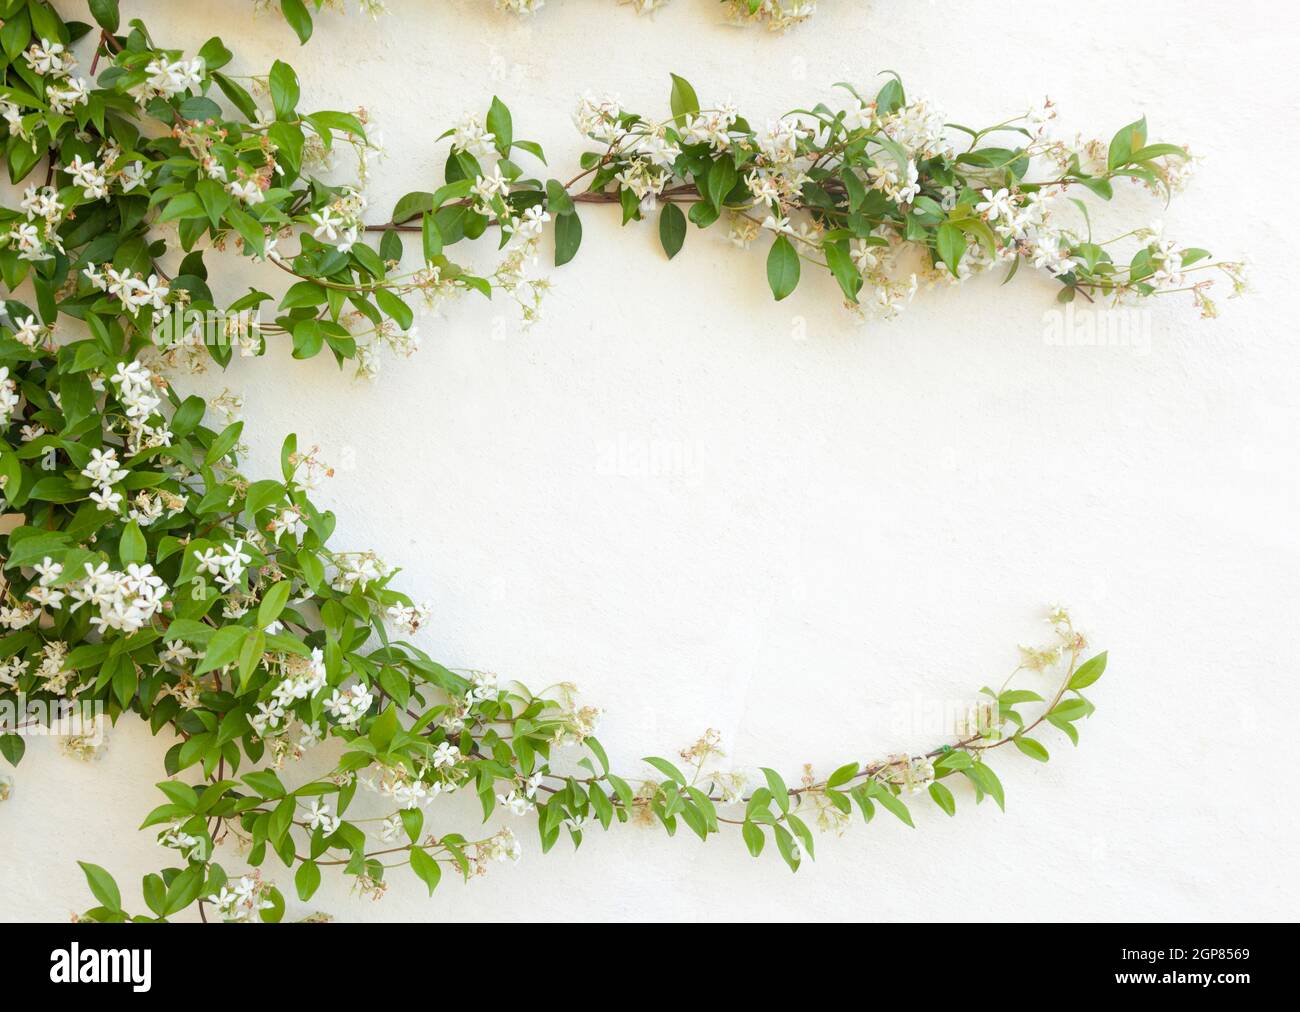 Natural frame of jasmine flowers on white wall. Stock Photo